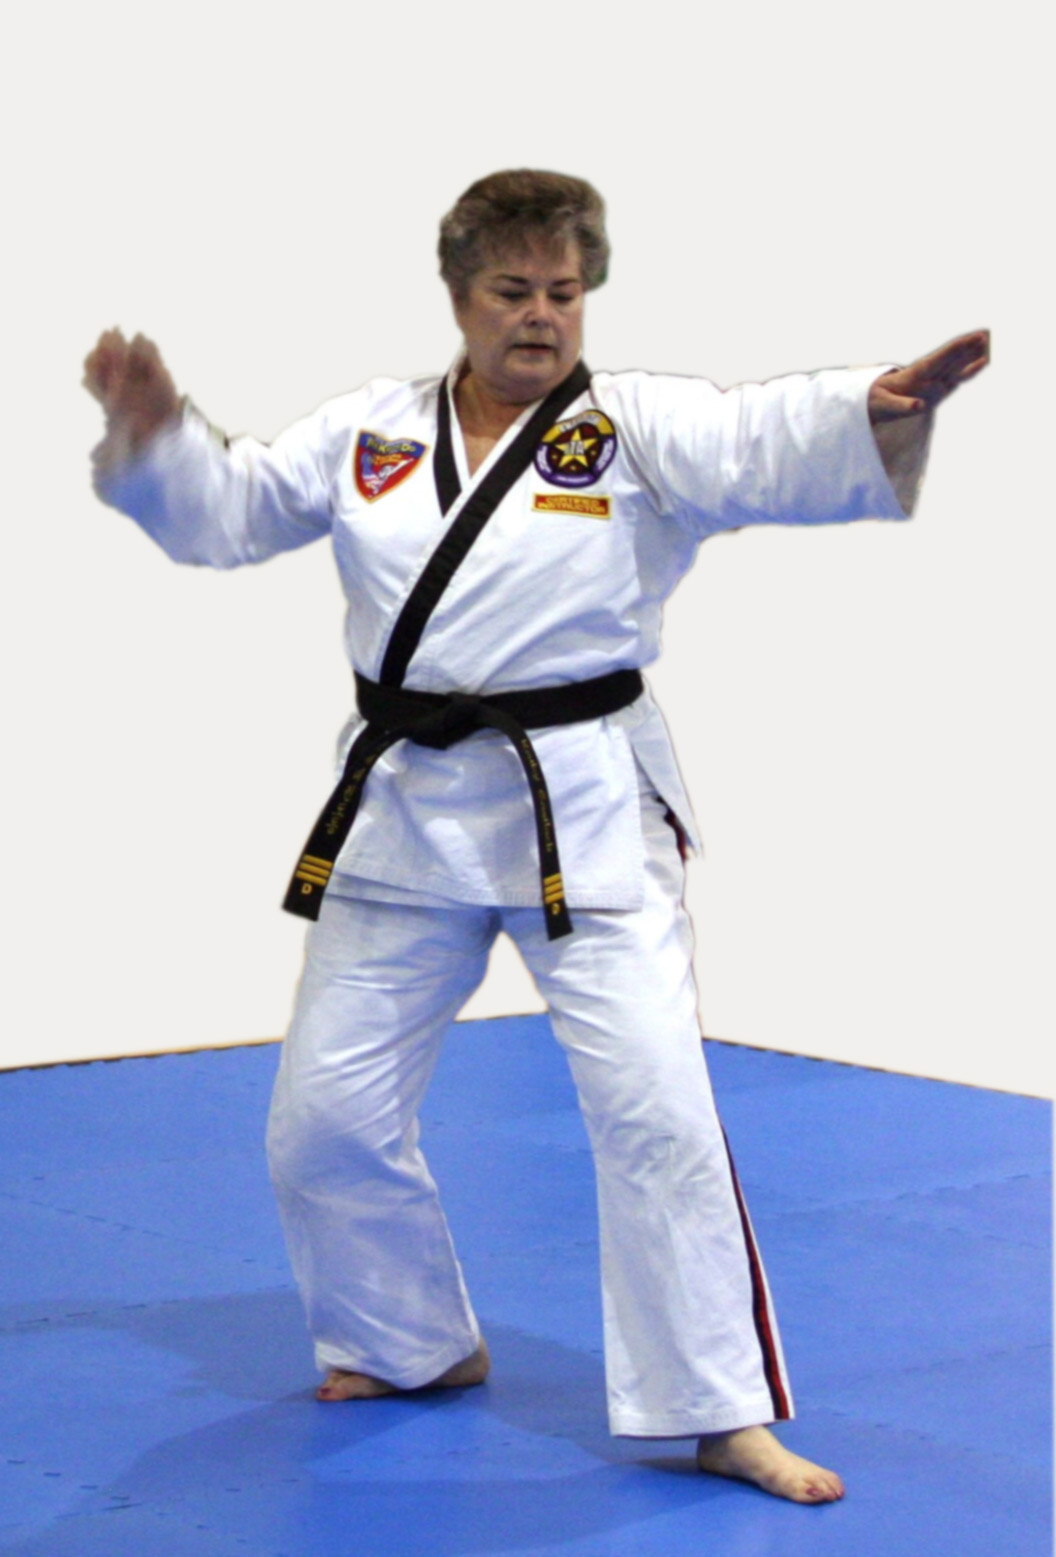 Adult black belt competing with her form at a tournament